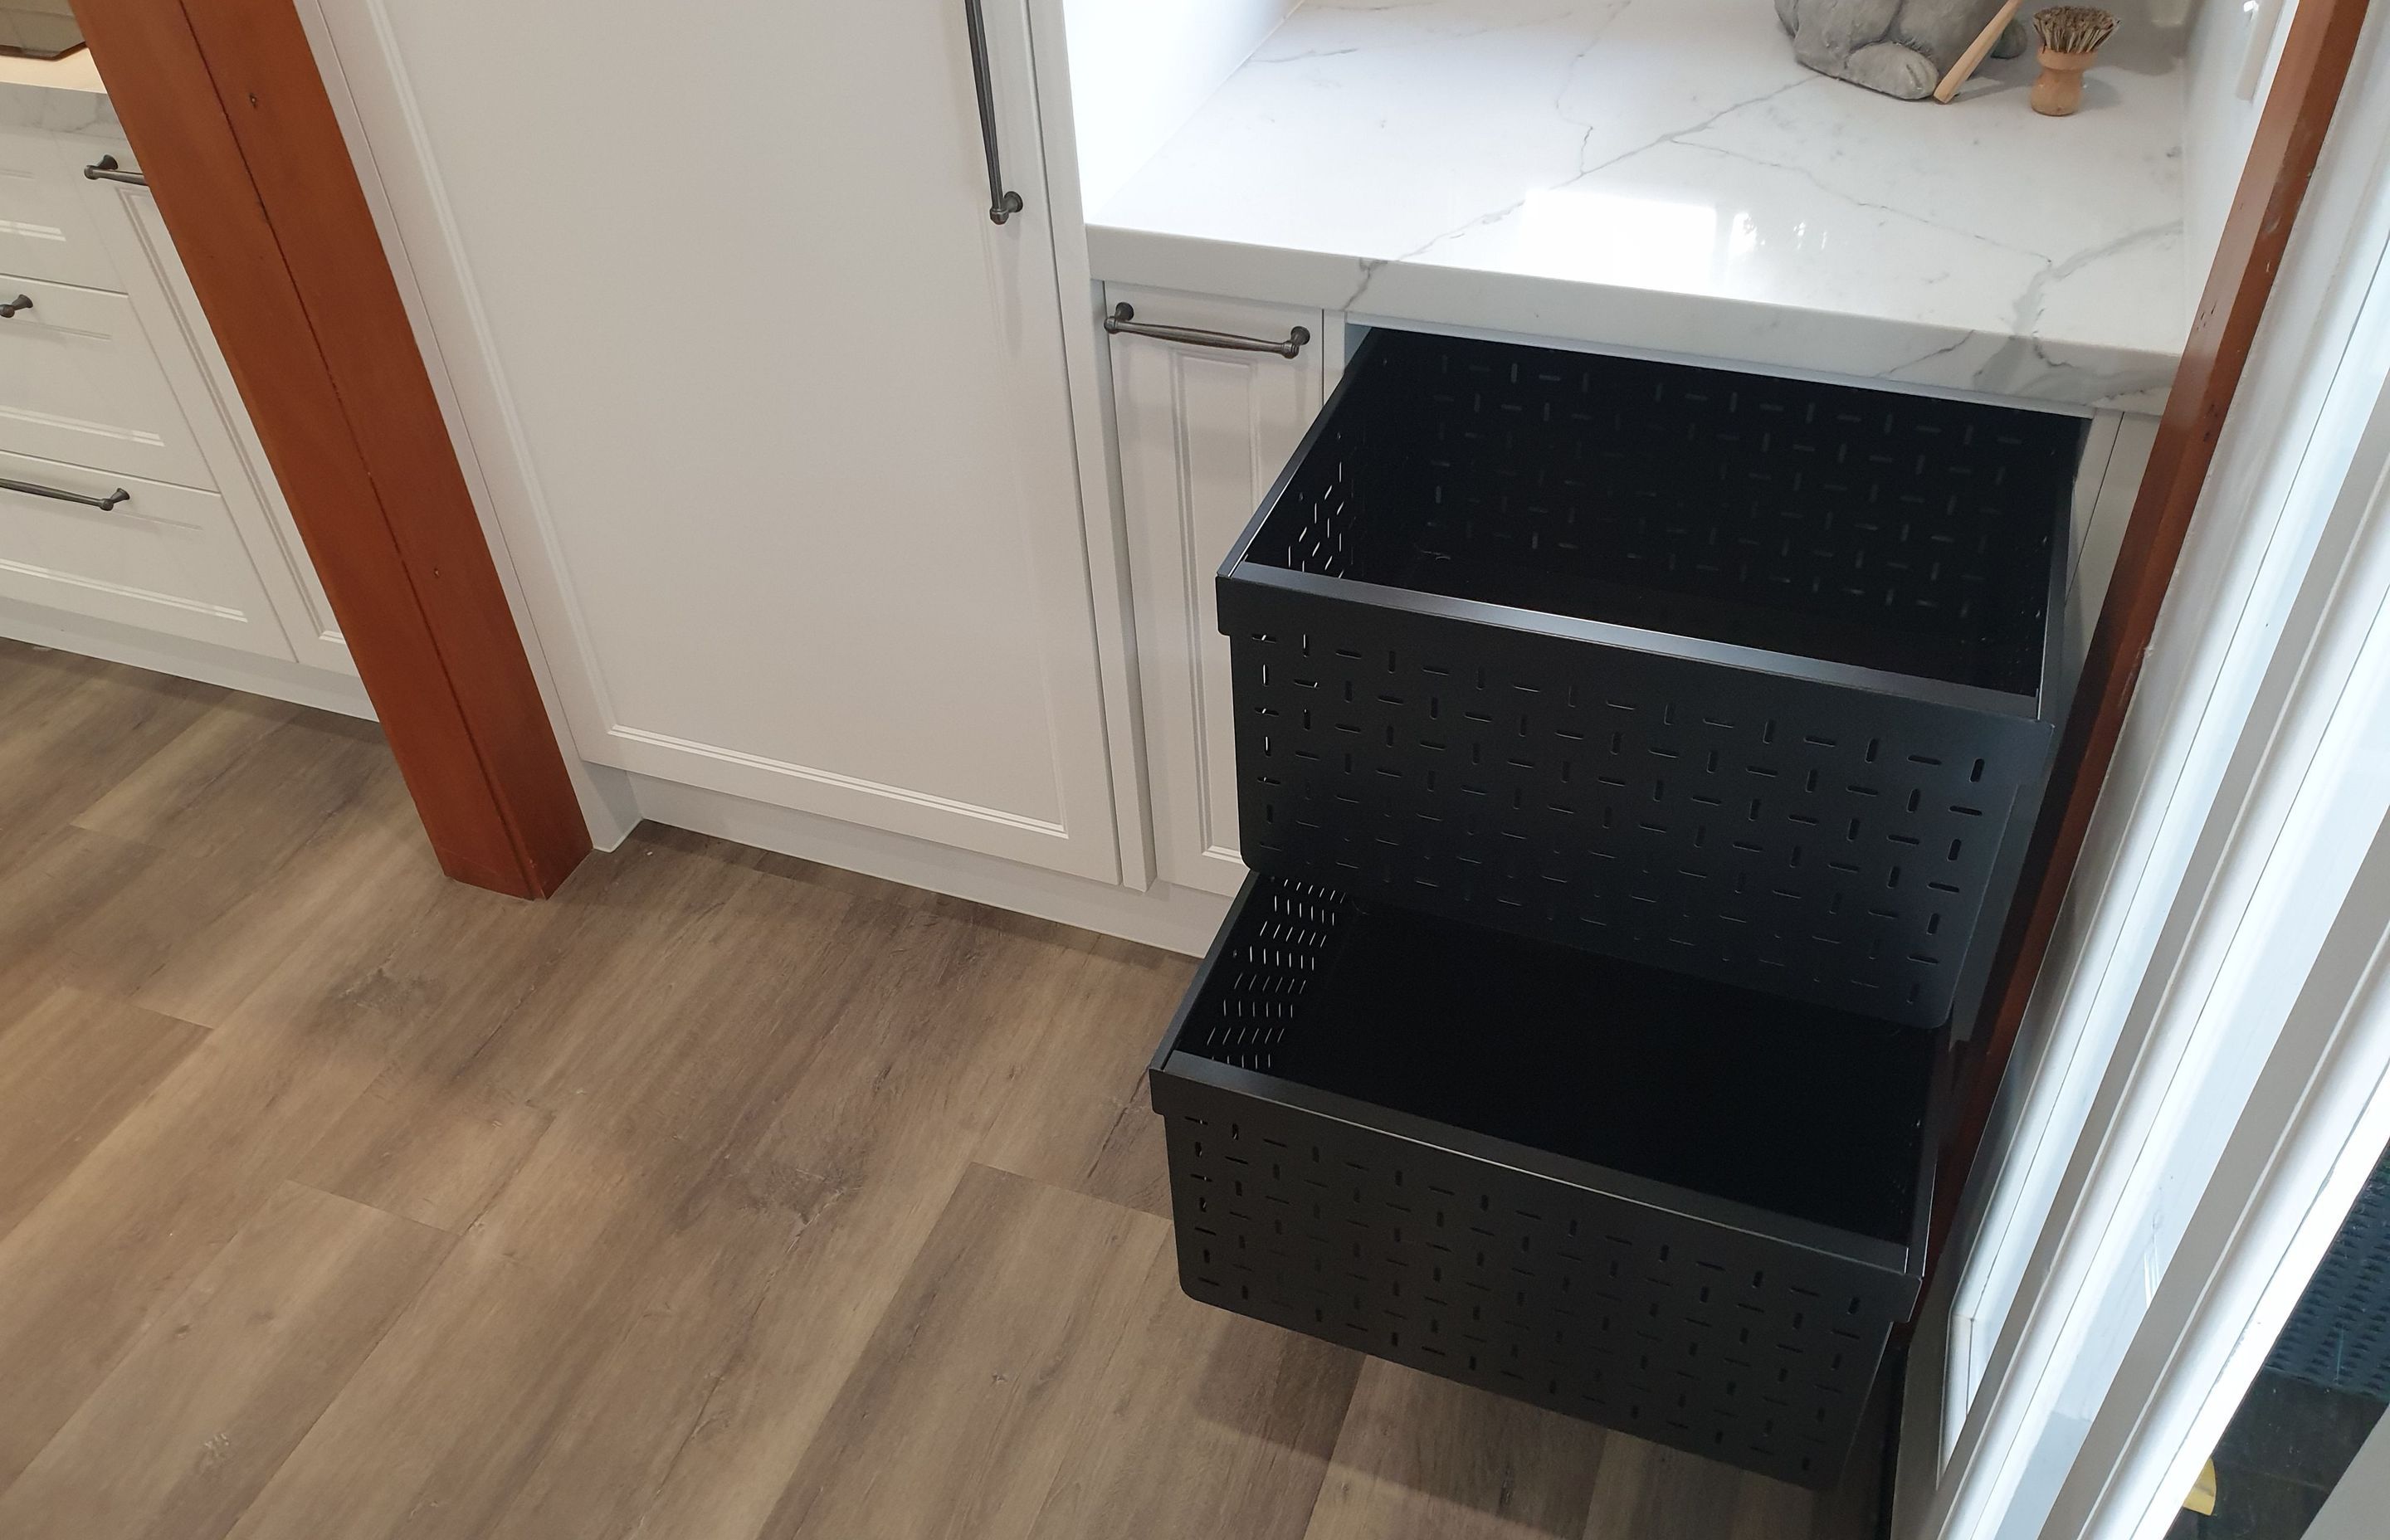 Tanova Ventilated Drawers - Robust for Busy Residential and Light Commercial Use - Seen Here Installed As Laundry Baskets